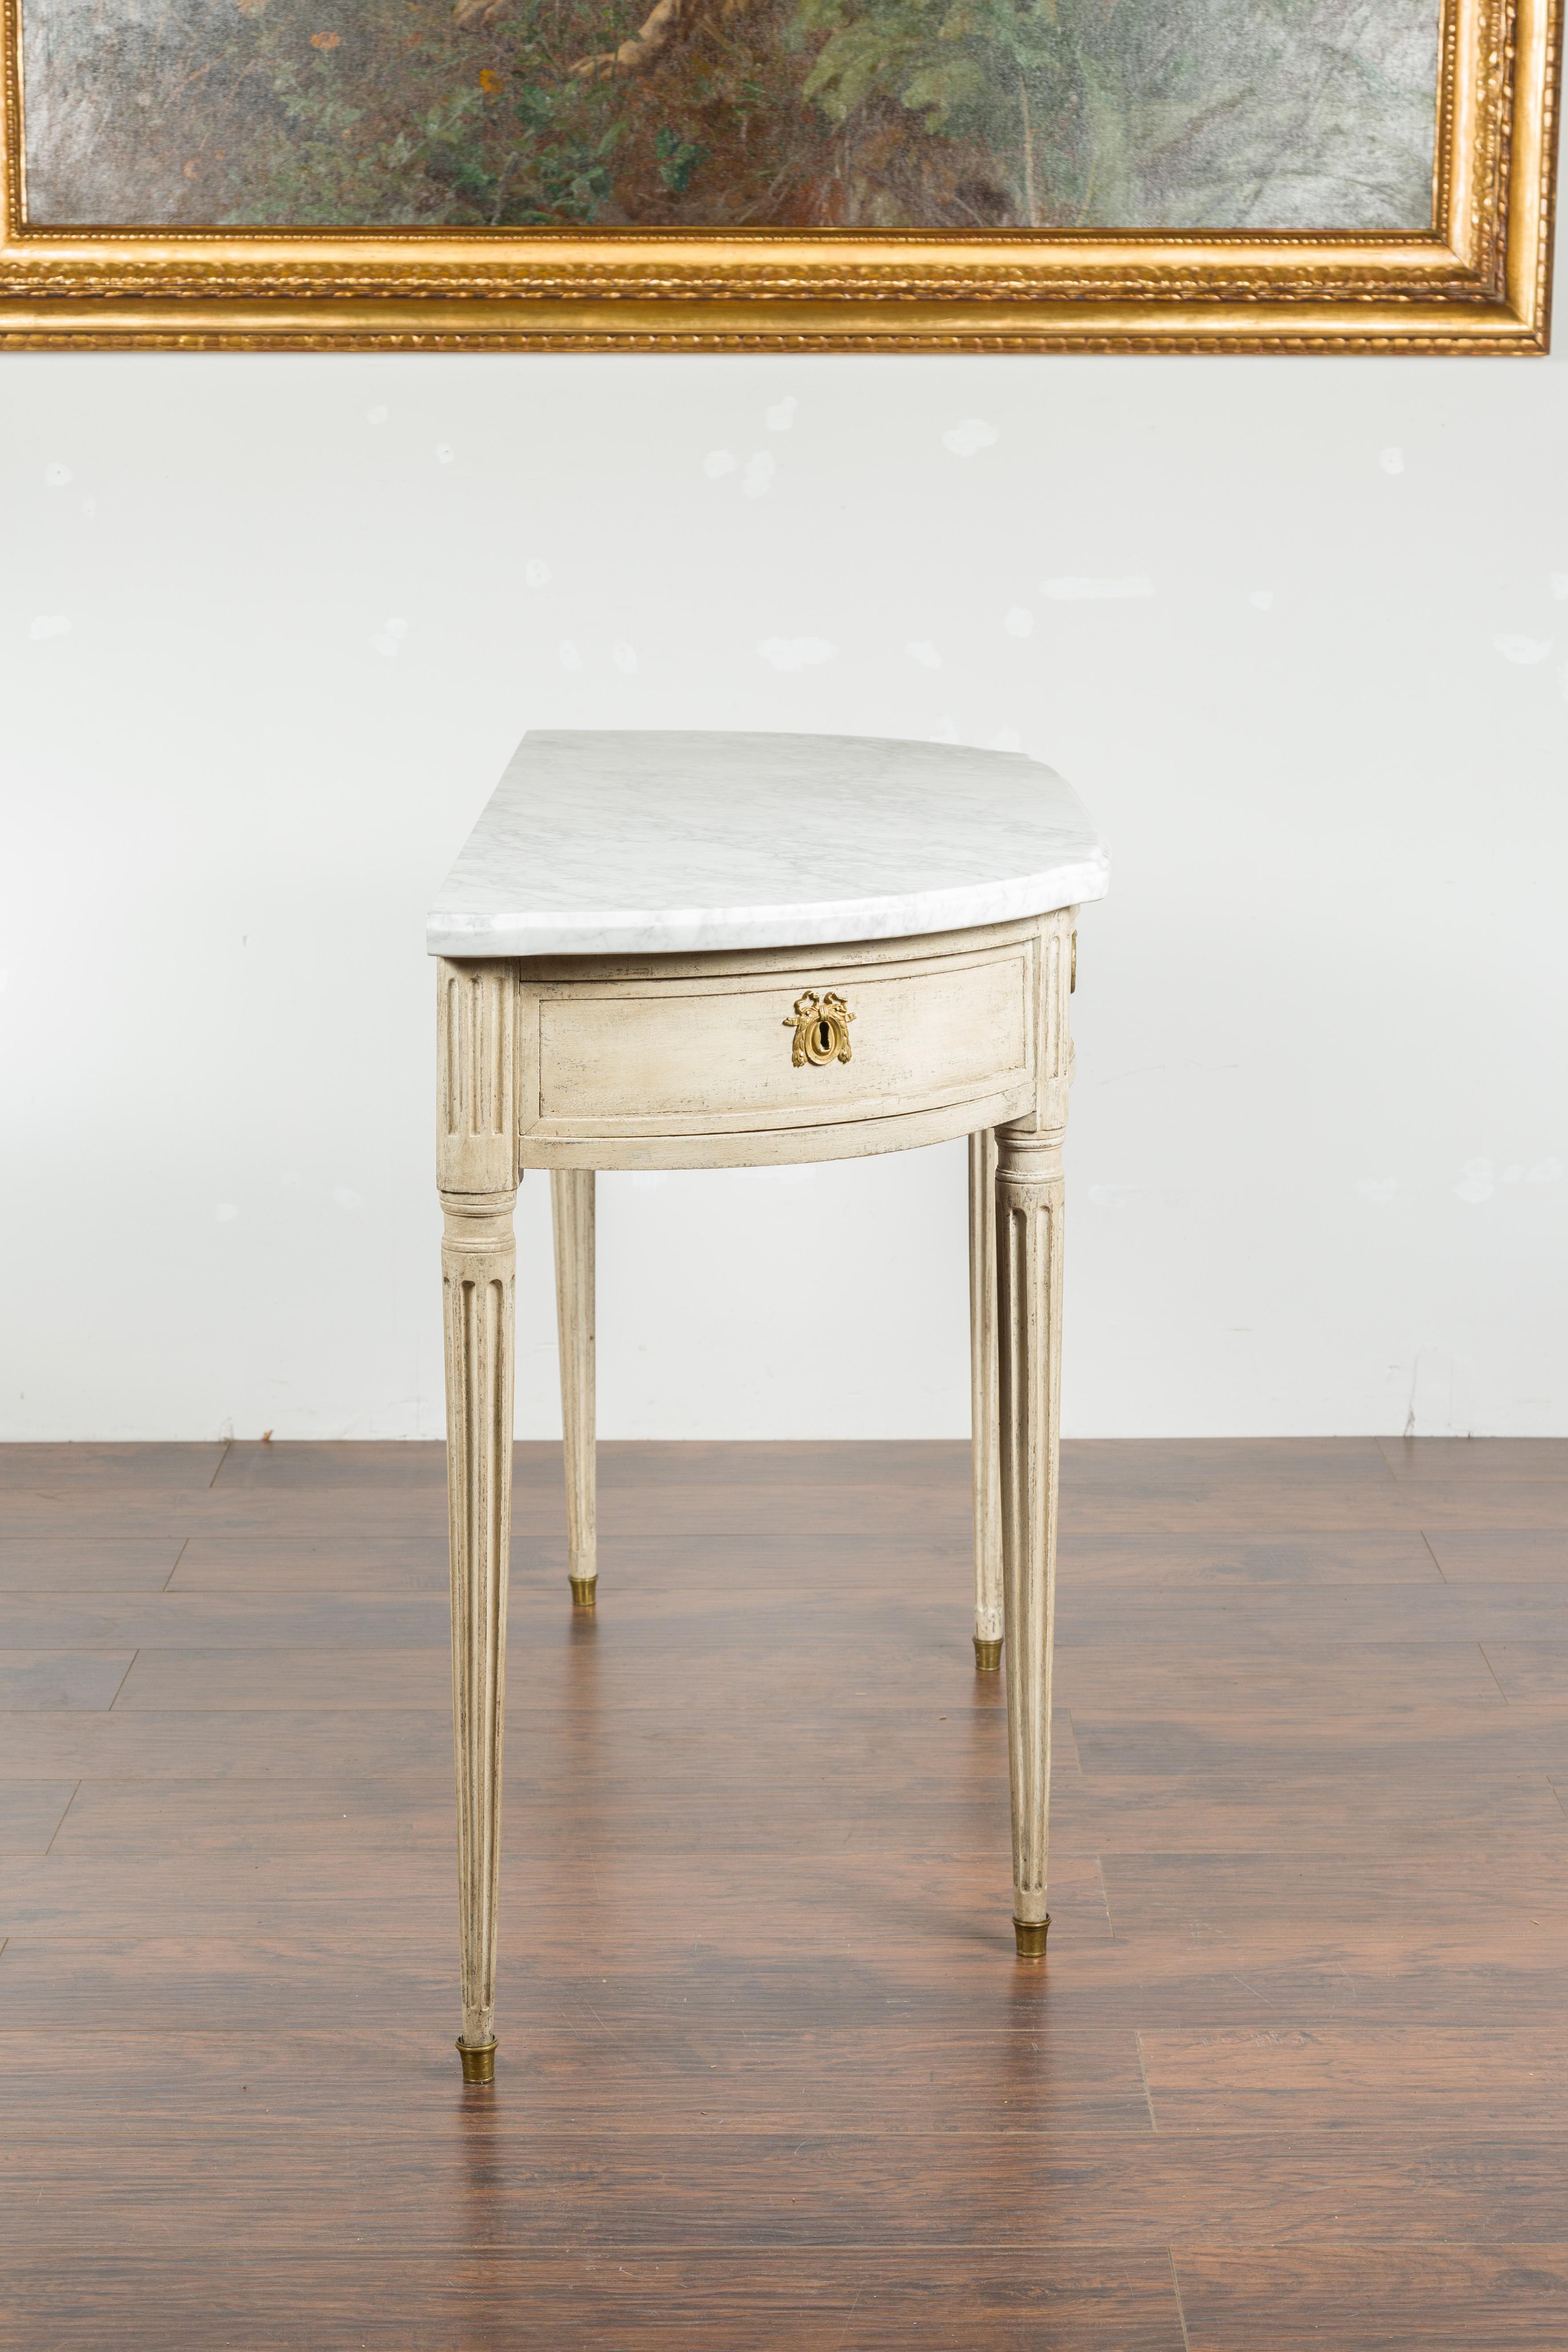 Pair of French 19th Century Neoclassical Style Demilune Tables with Marble Tops For Sale 10